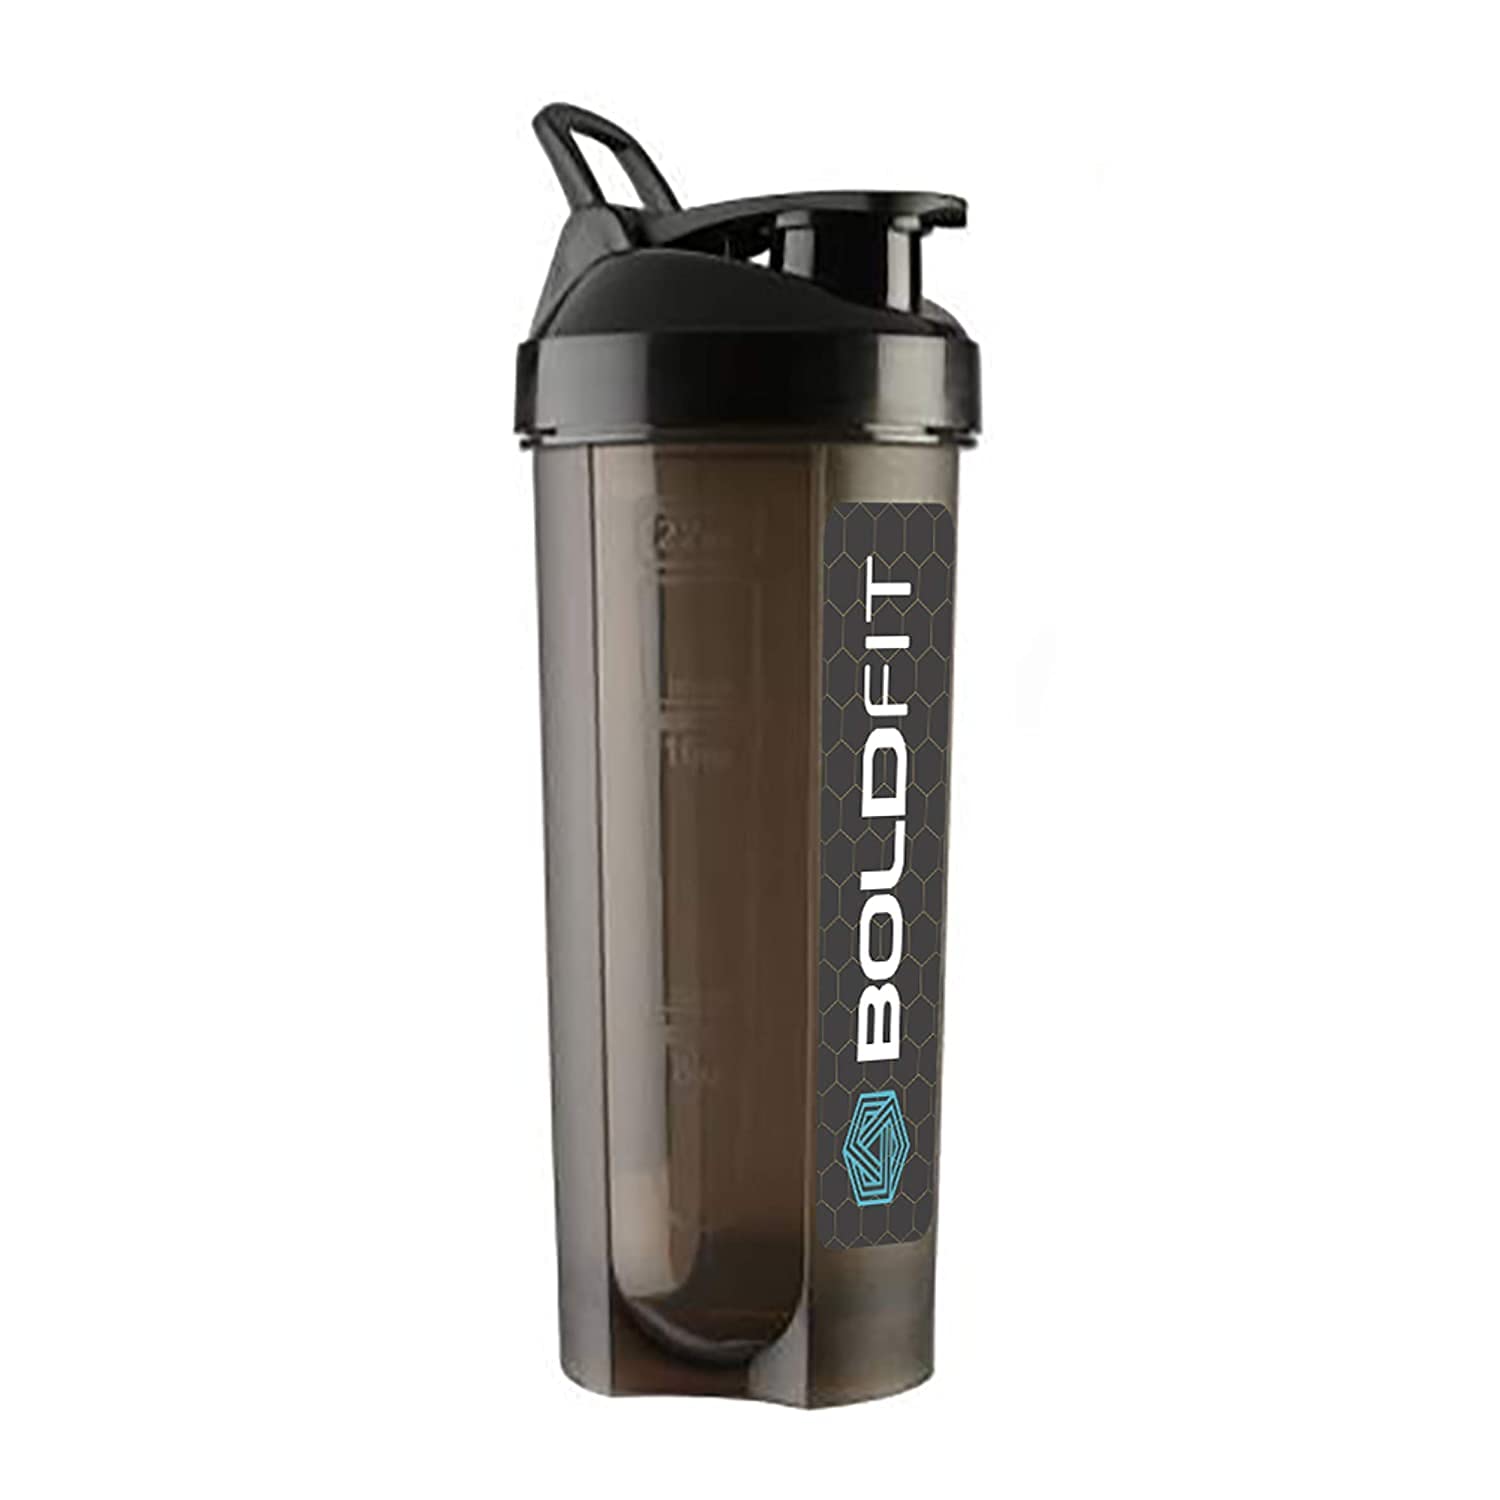 Workout Accessories, Shakers, Bottles, Gym Towels & More